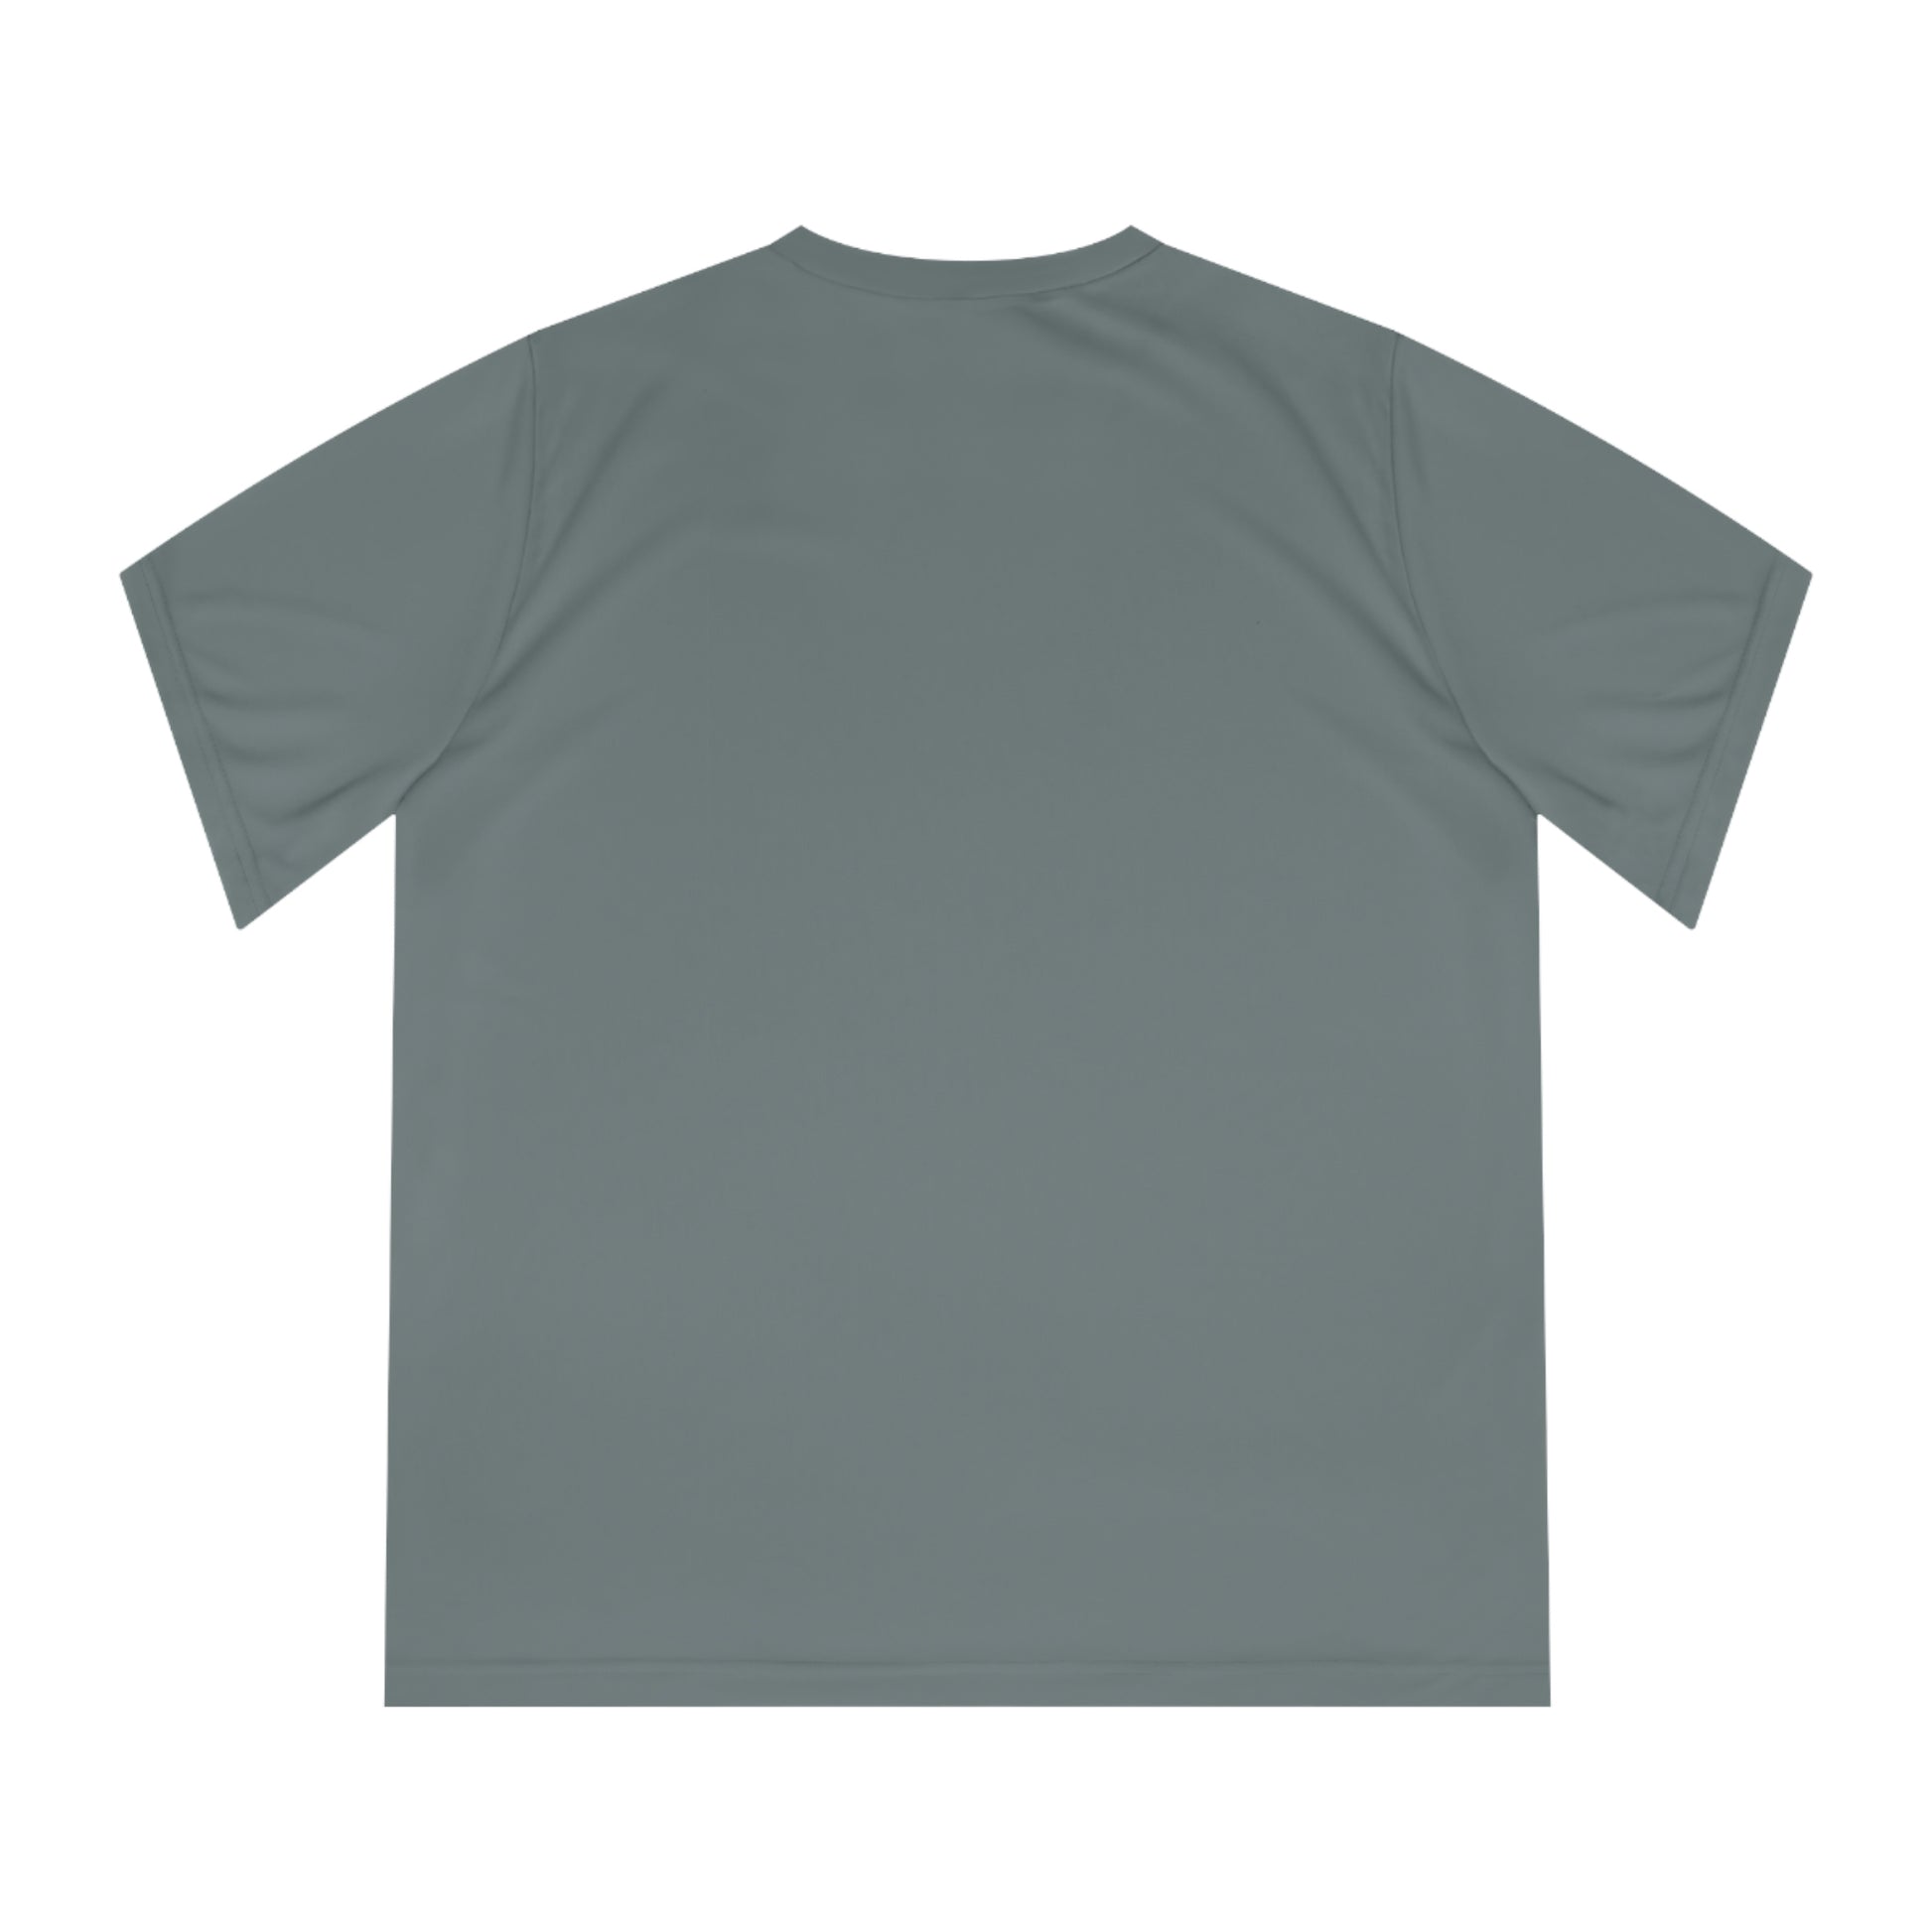 Flat back view of the Sport Graphic grey t-shirt